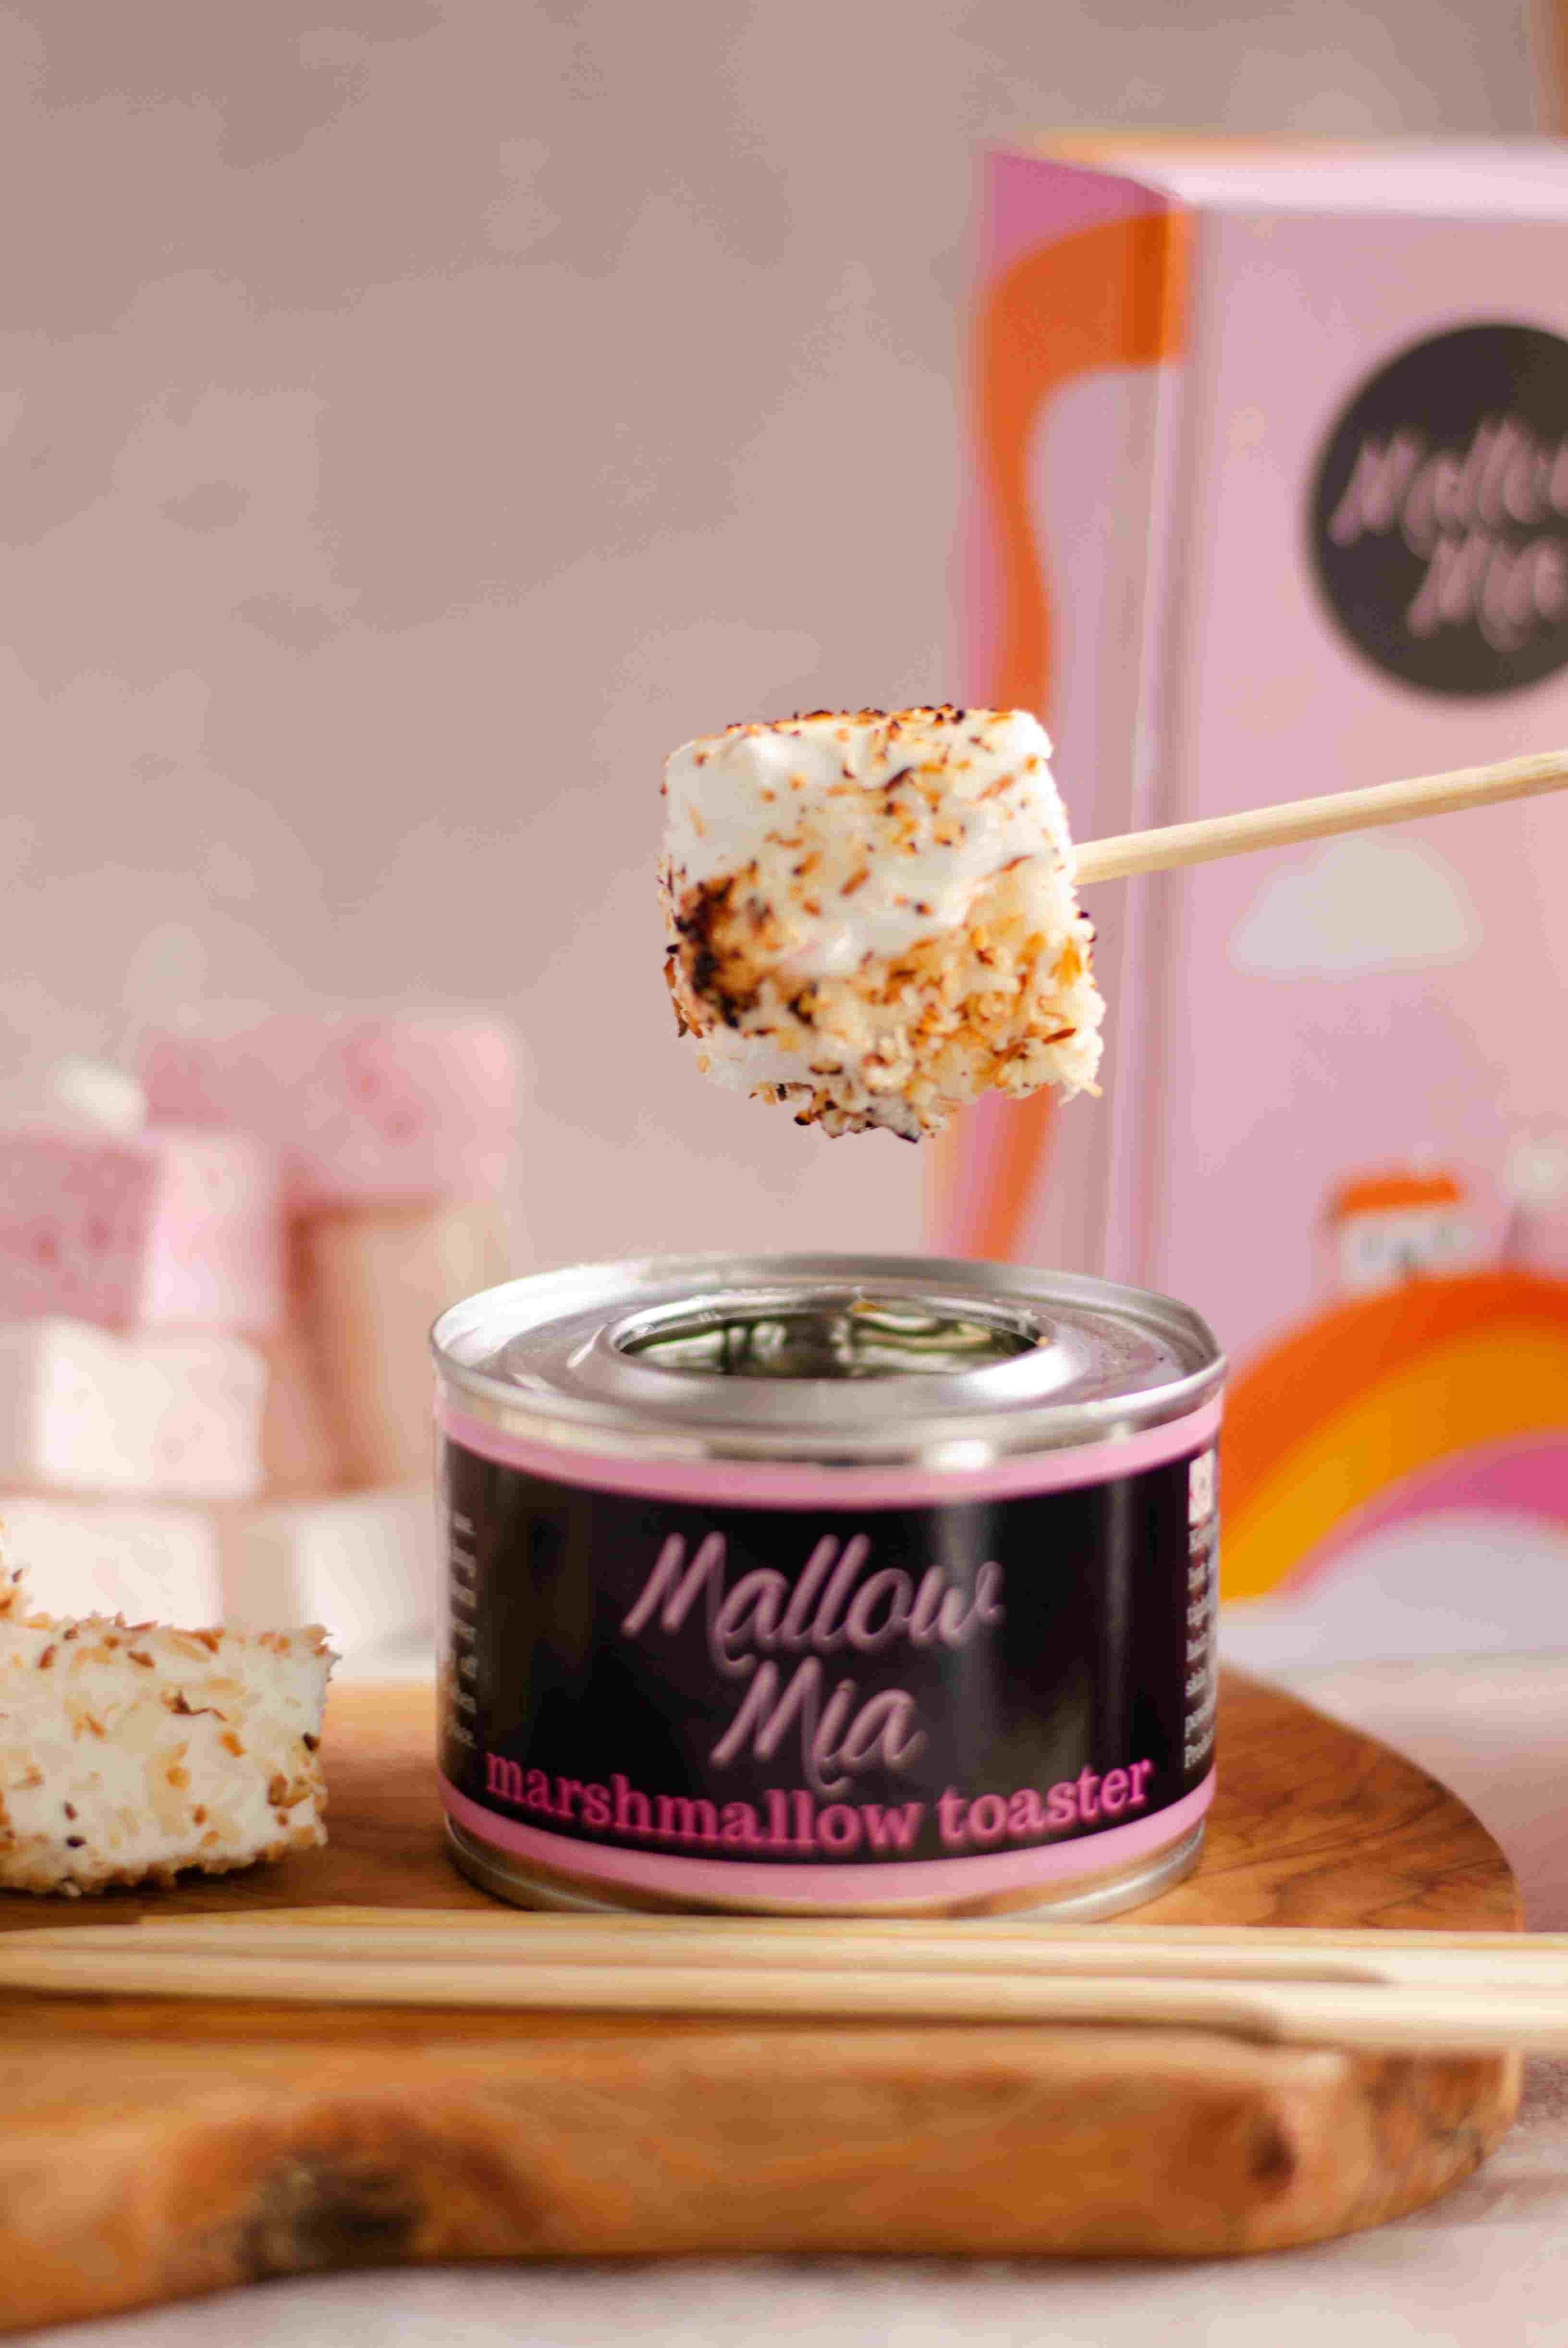 Classic marshmallow toasting box (with 2 bags of marshmallows)